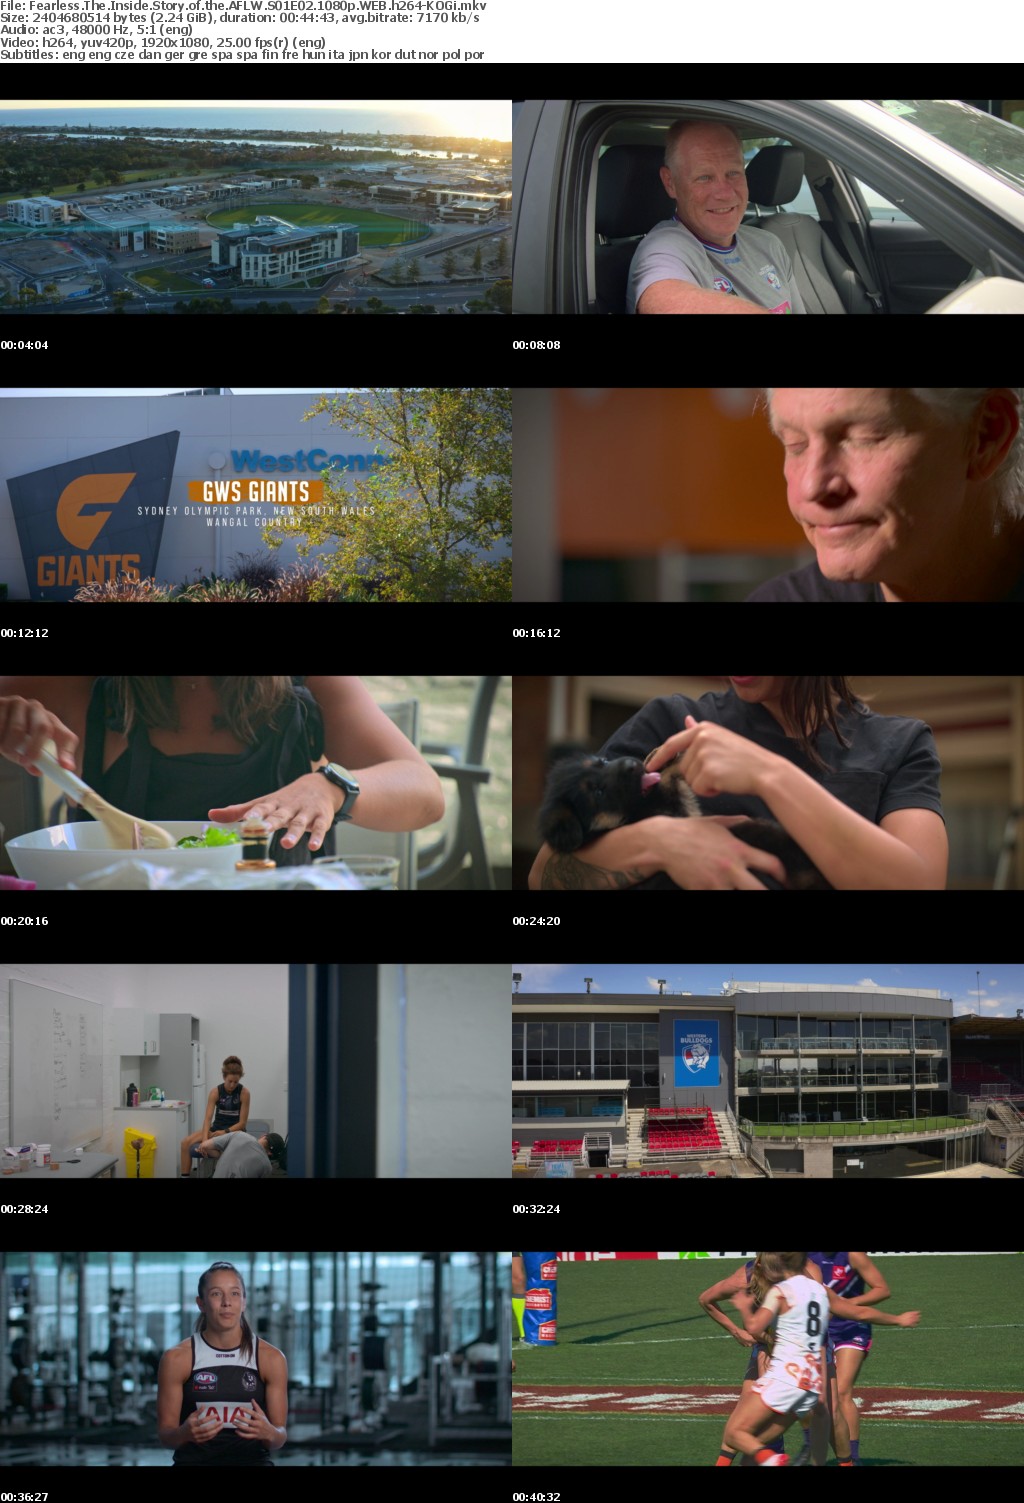 Fearless The Inside Story of the AFLW S01E02 1080p WEB h264-KOGi